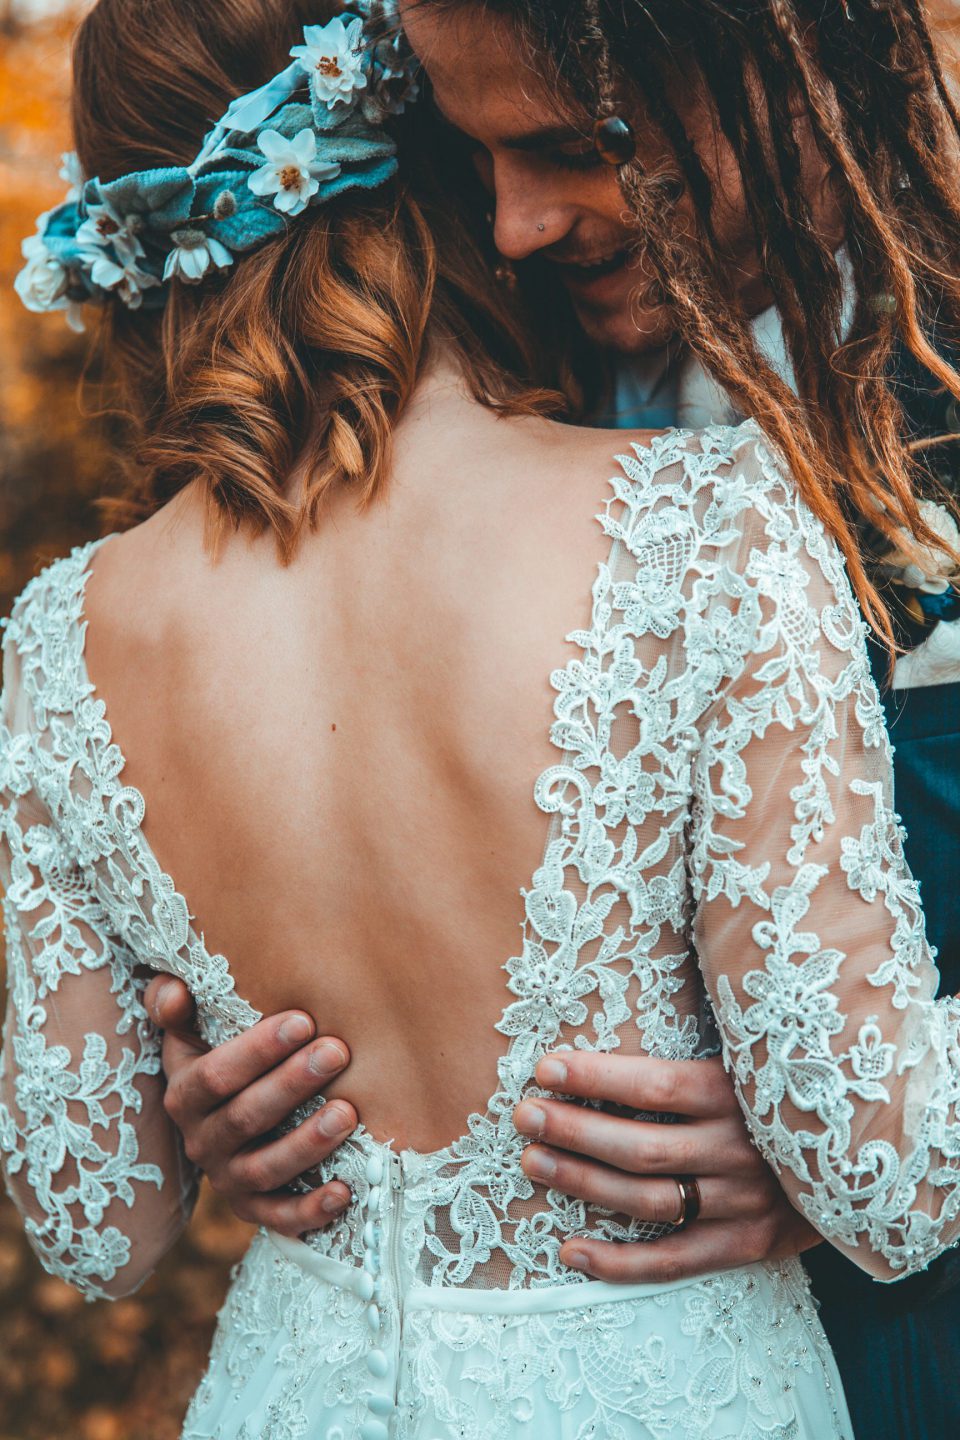 A great dress with open back